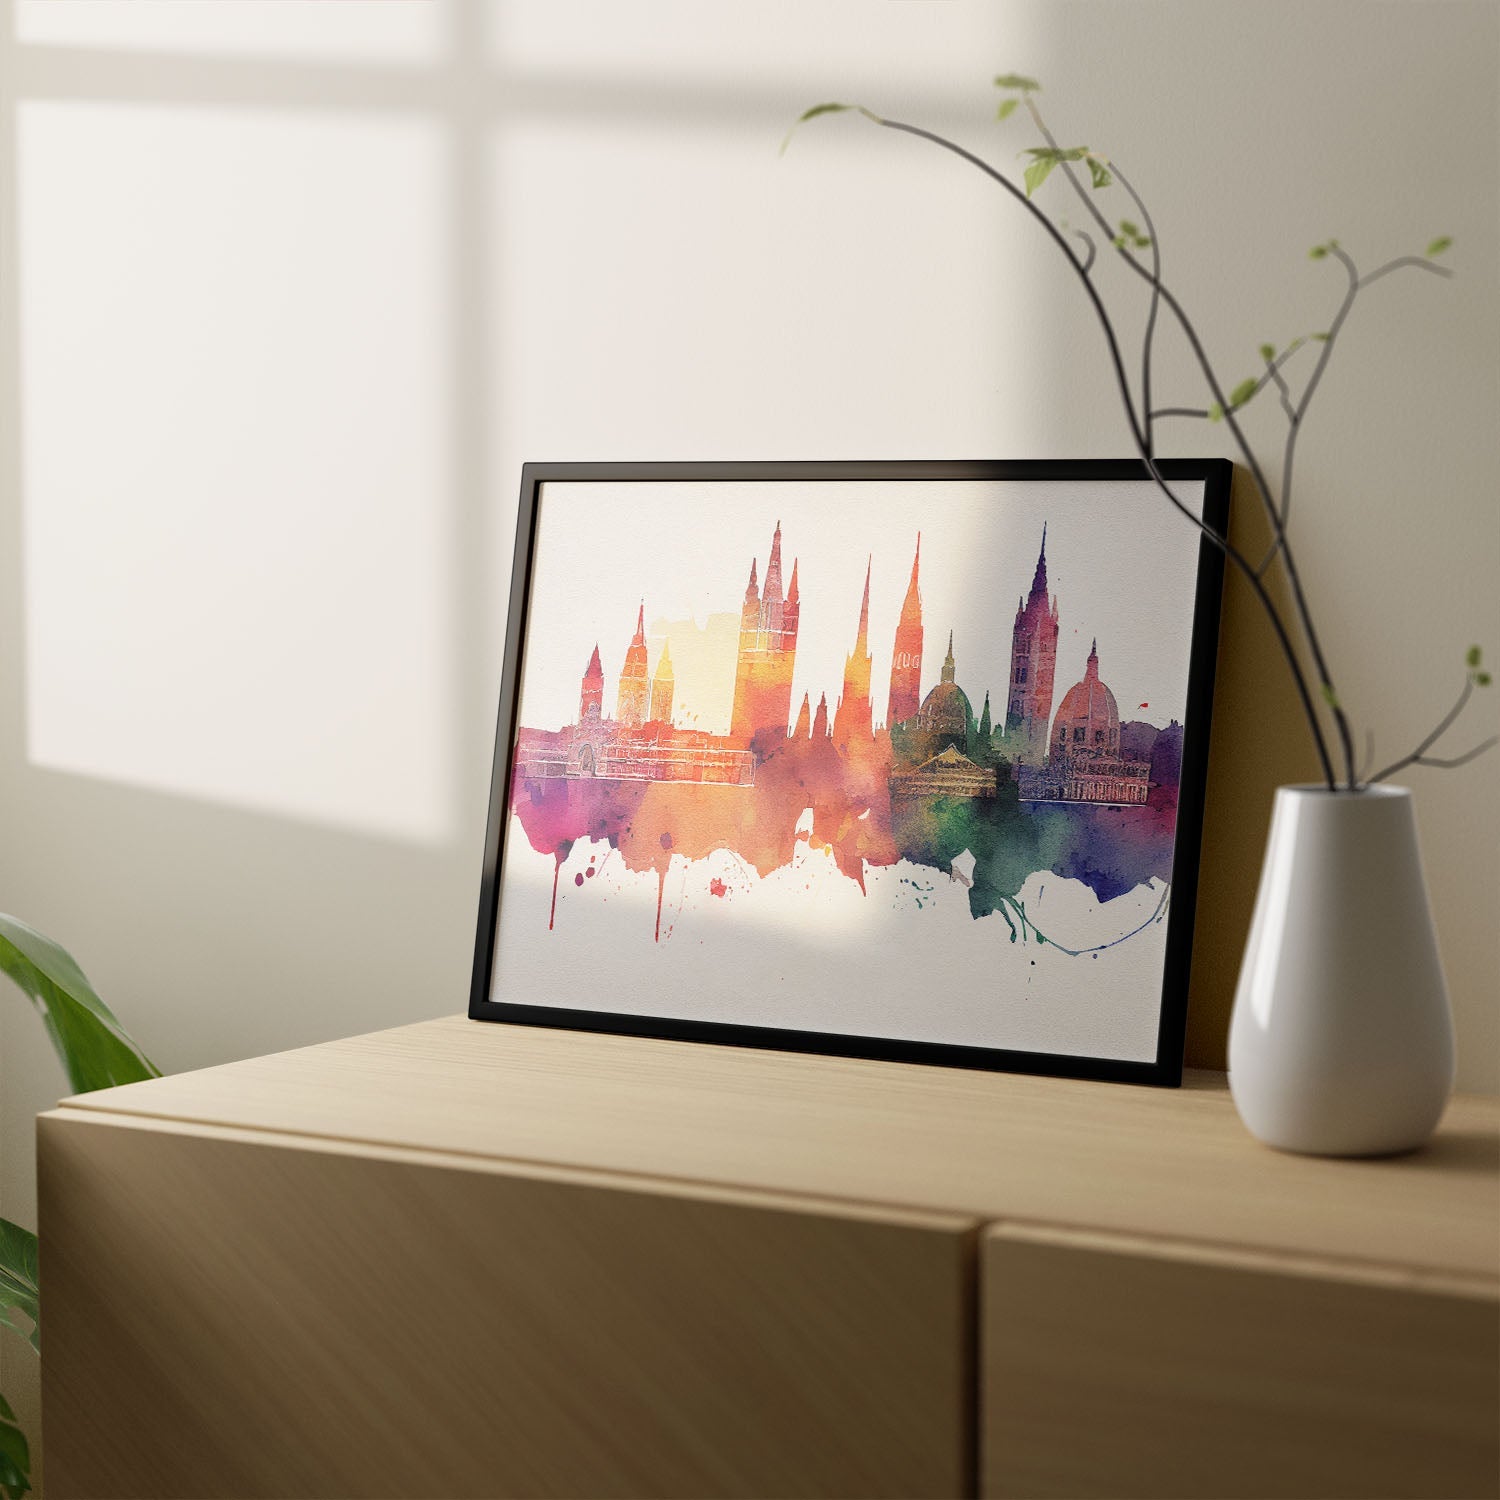 Nacnic watercolor of a skyline of the city of Vienna_3. Aesthetic Wall Art Prints for Bedroom or Living Room Design.-Artwork-Nacnic-A4-Sin Marco-Nacnic Estudio SL